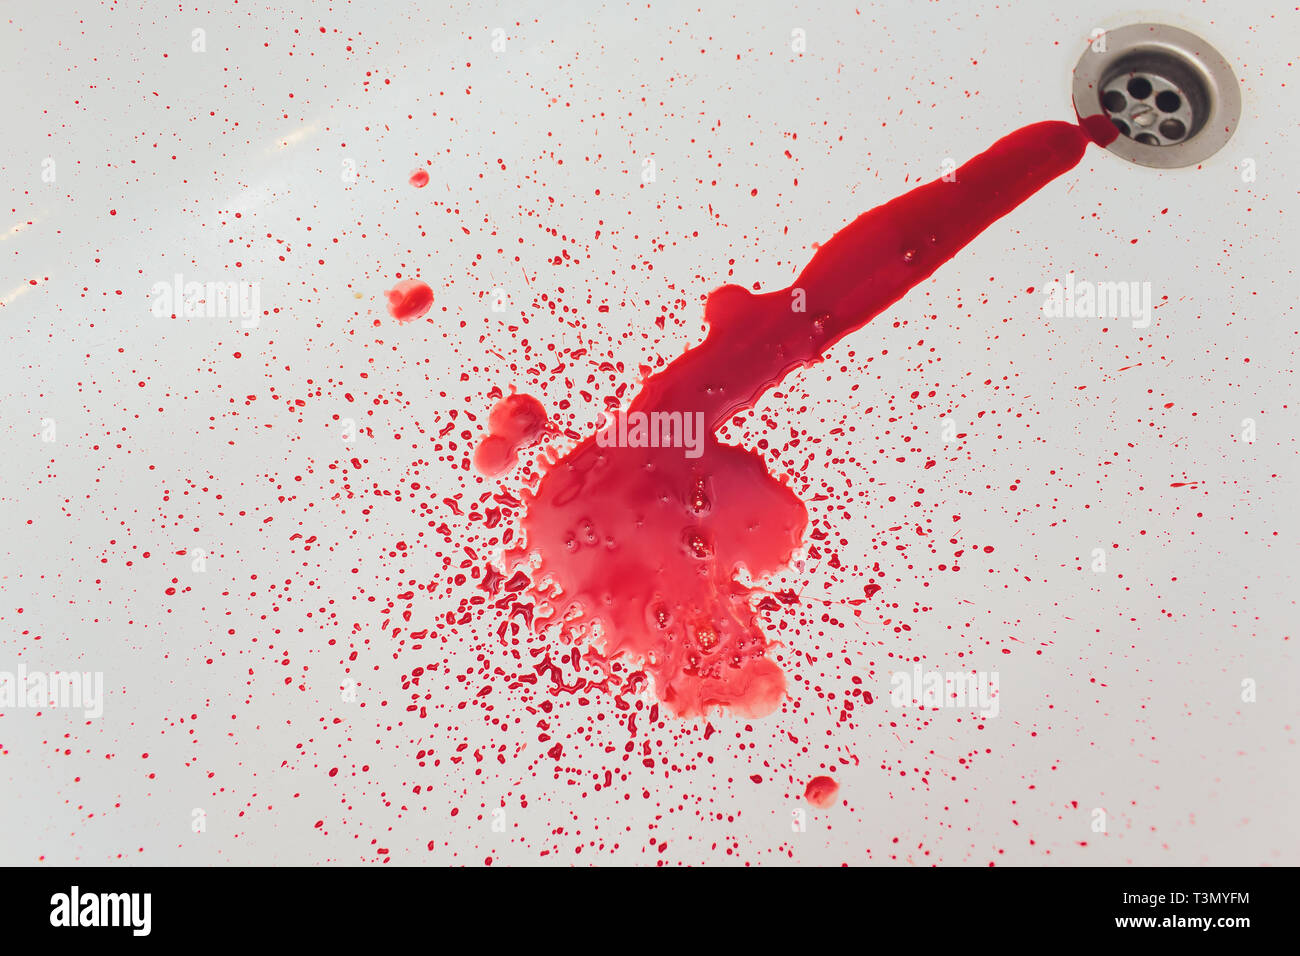 Splashes of blood dripping into the sink in the bathroom Stock Photo